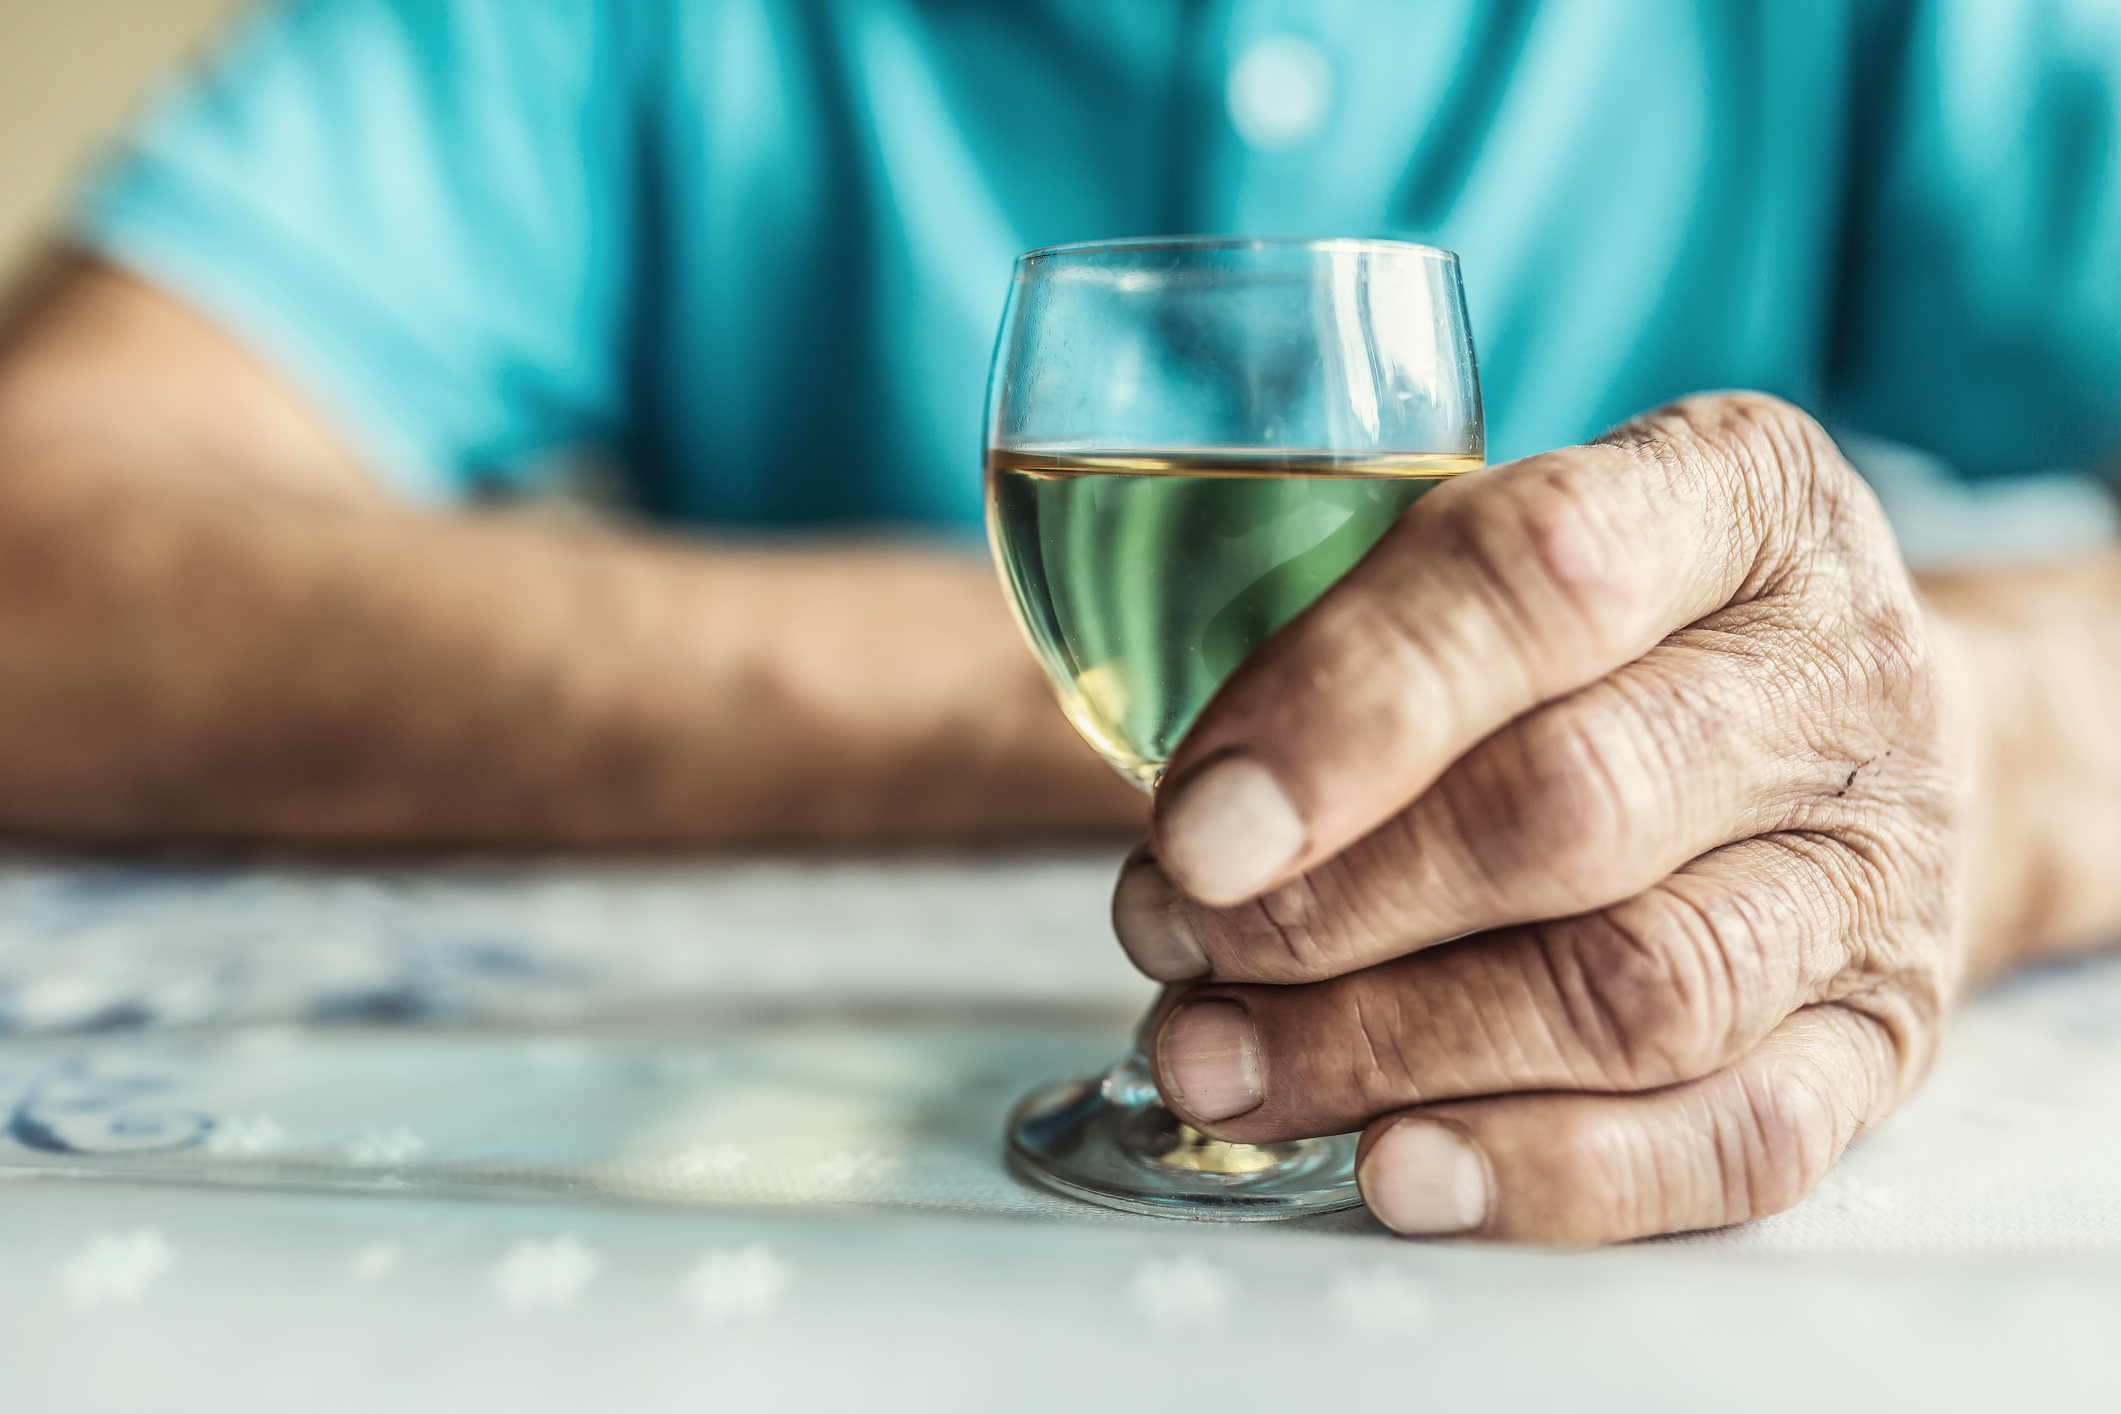 Close-up of an older person&#x27;s hand holding a glass of white wine